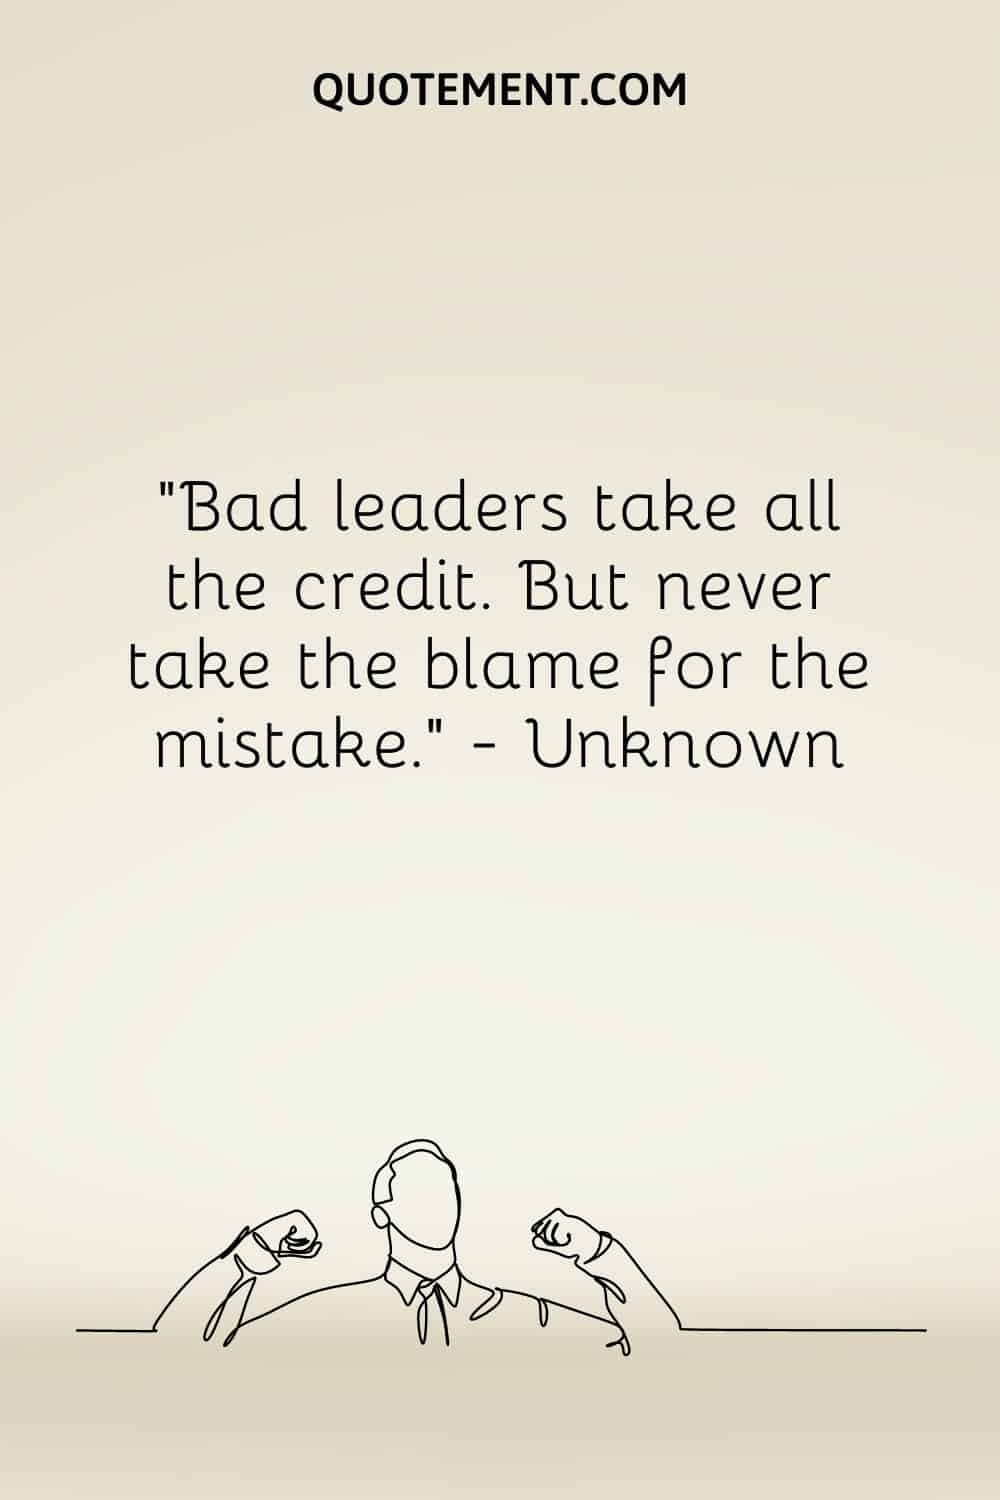 Bad leaders take all the credit. But never take the blame for the mistake